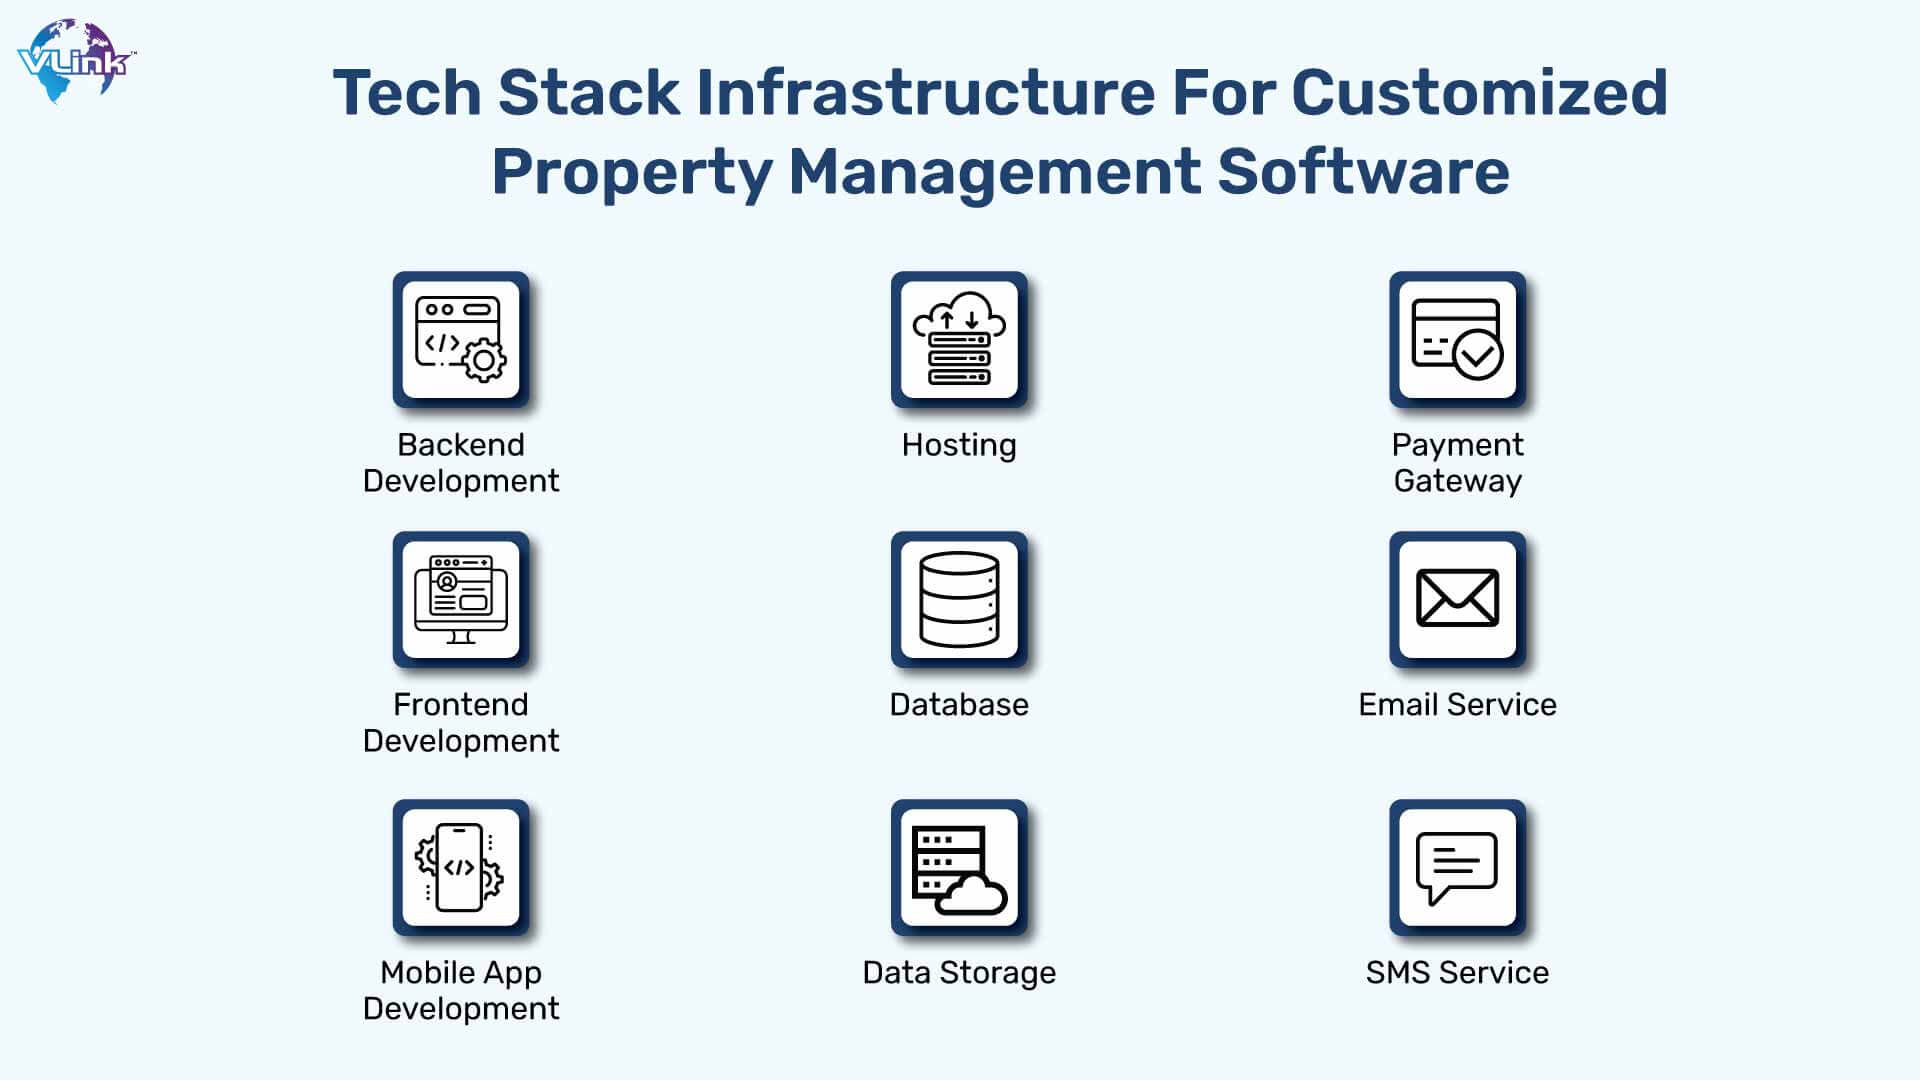 Tech Stack Infrastructure For Customized Property Management Software